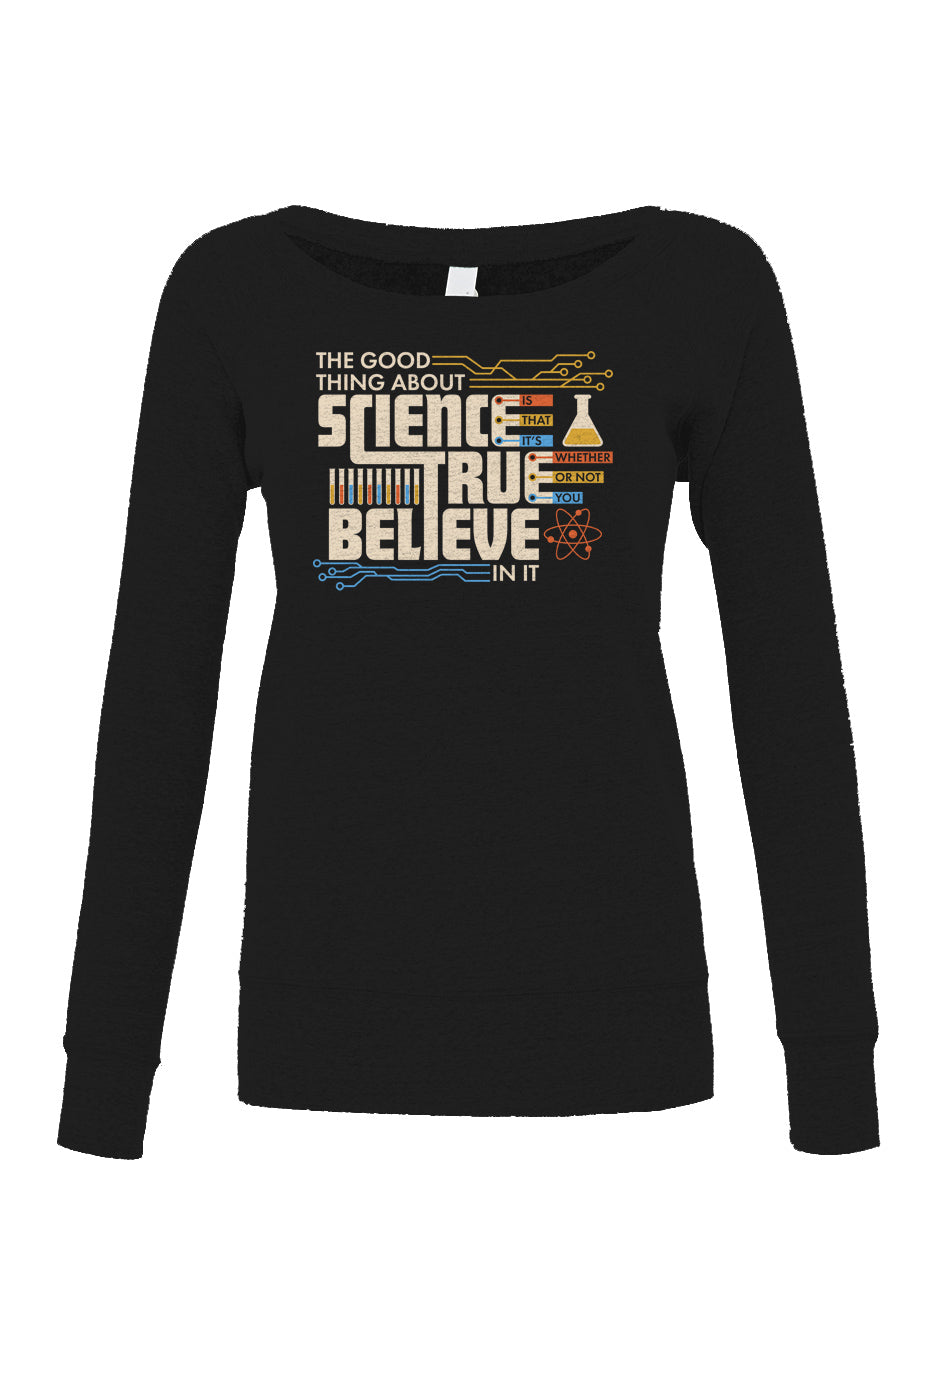 Women's The Good Thing About Science Is That It's True Scoop Neck Fleece